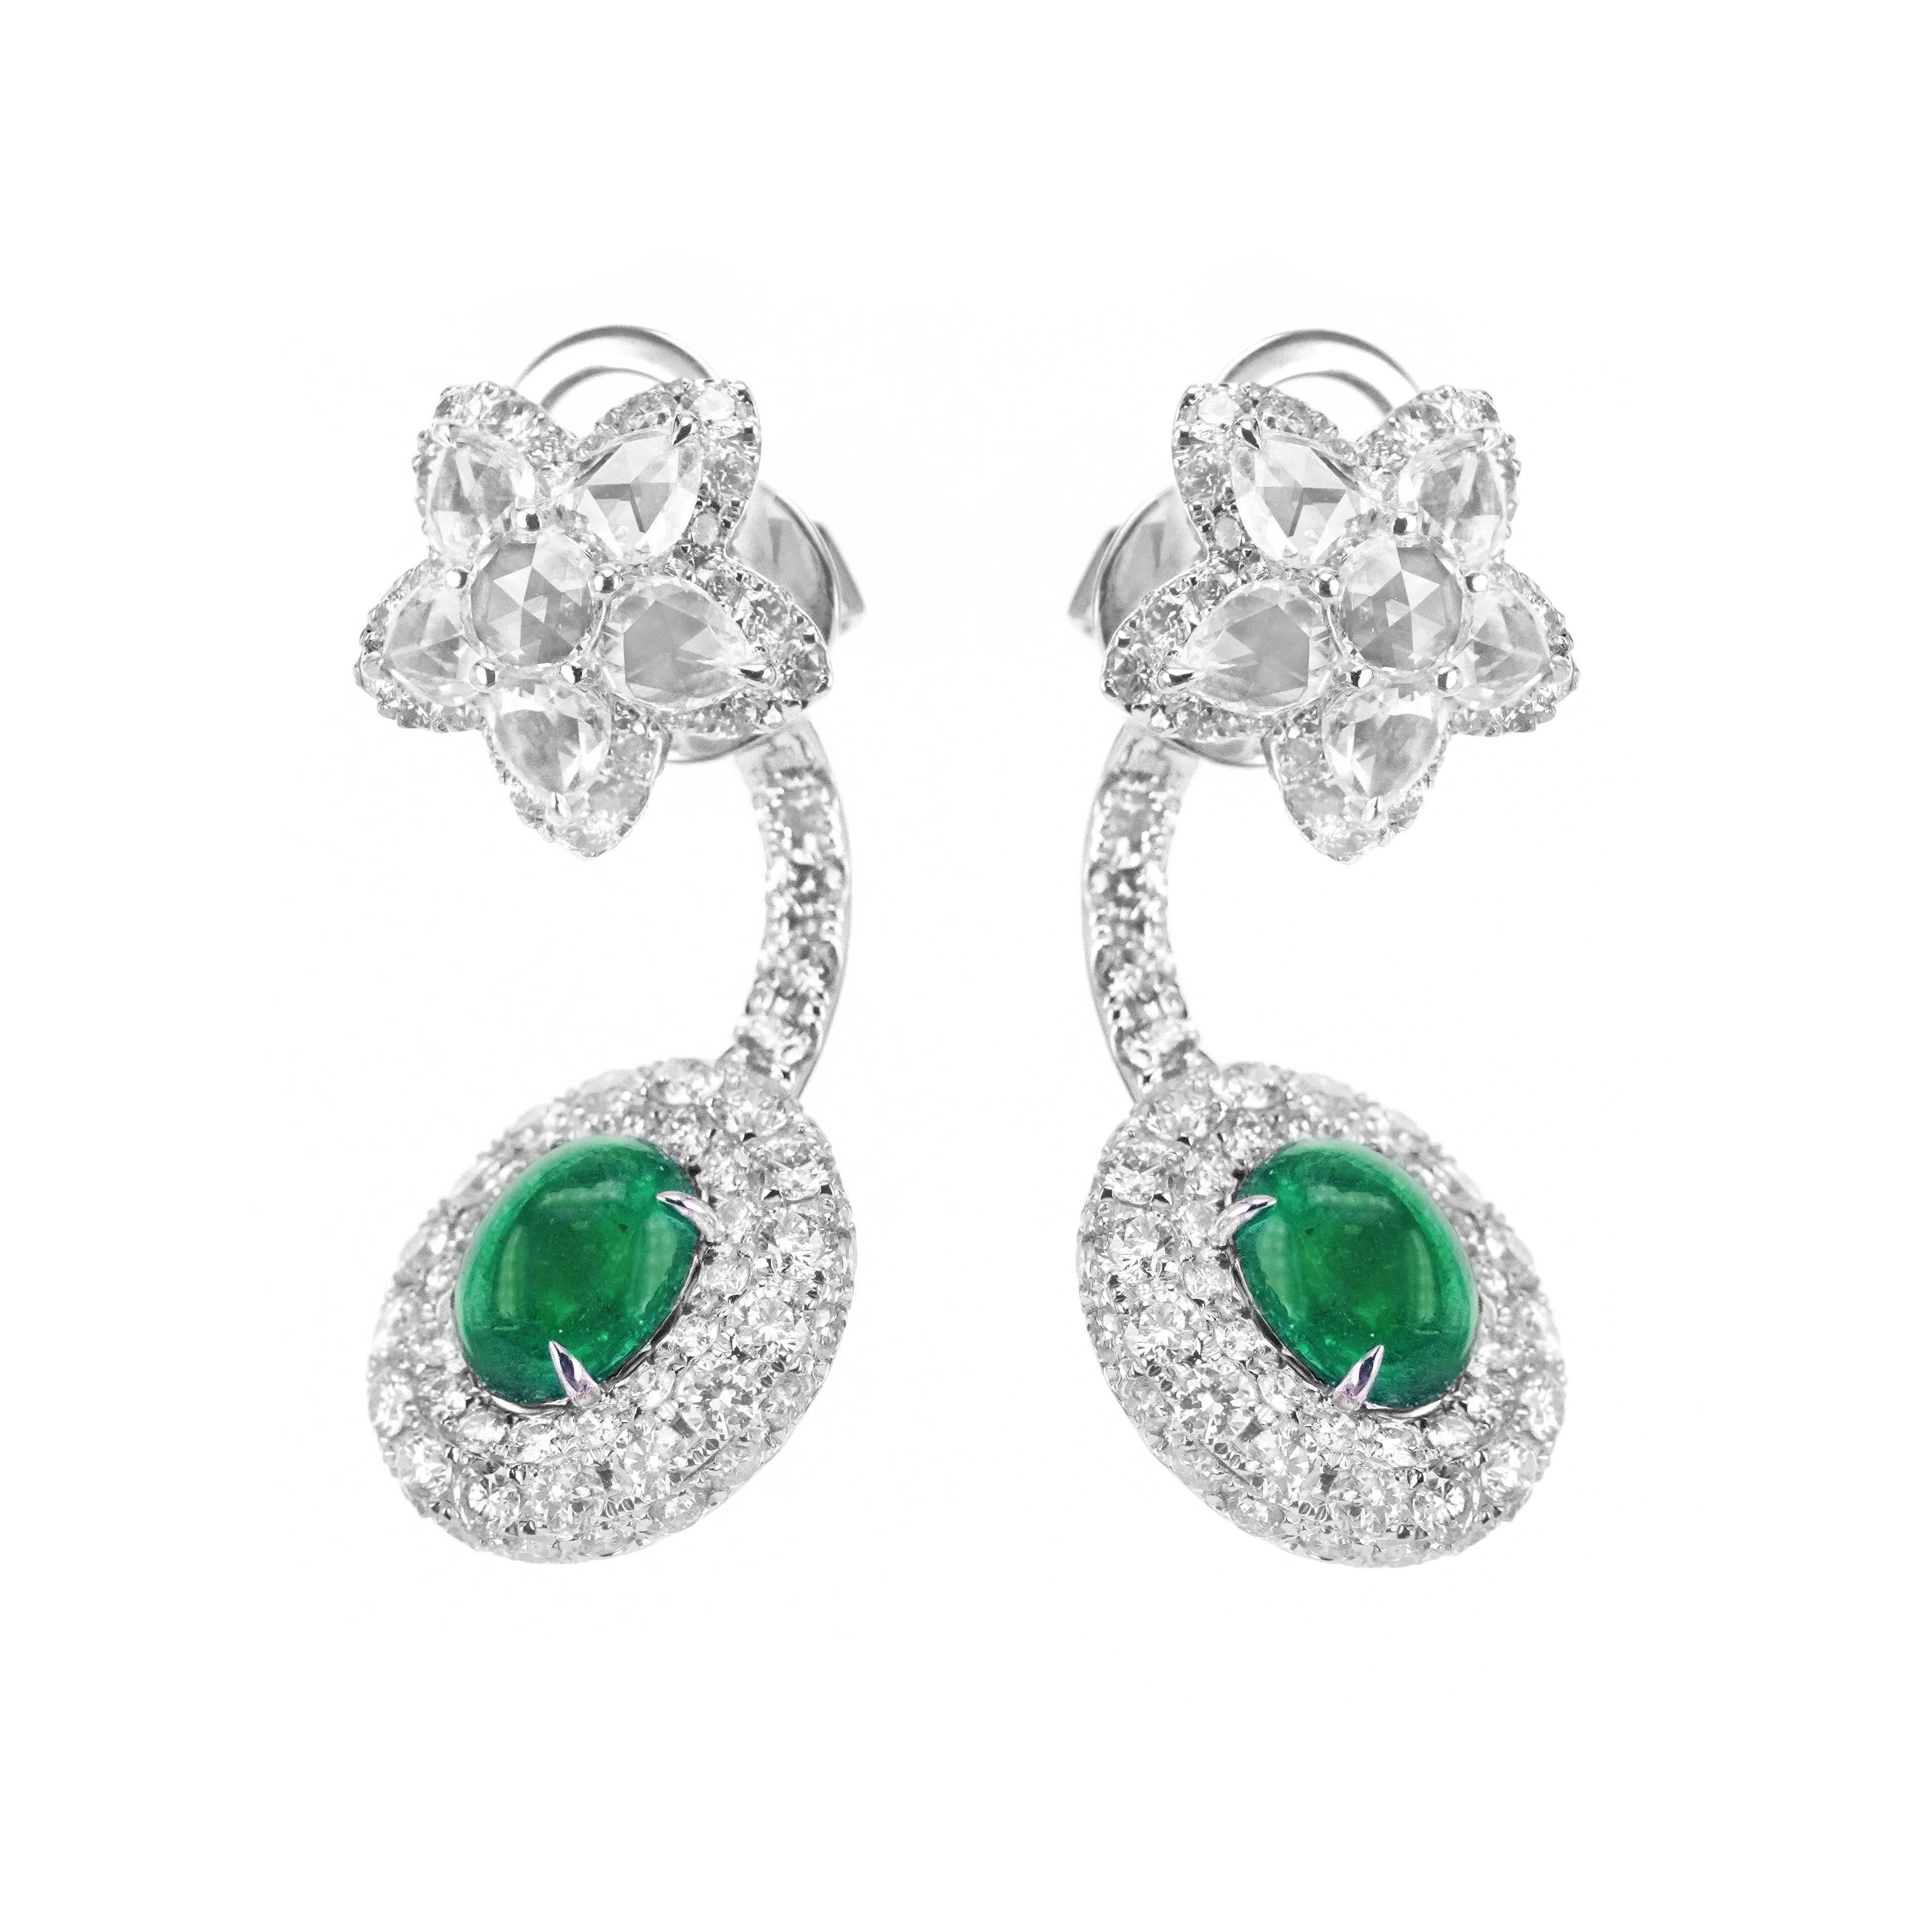 A 3.30 carat Colombian Emerald are set along with 5.84 carat of 'D' Color Vvs Clarity white diamond in this behind the ear drop earring. The earring has been made in 18K Gold and has been crafted in Hong Kong by the very talented hand made jewelry